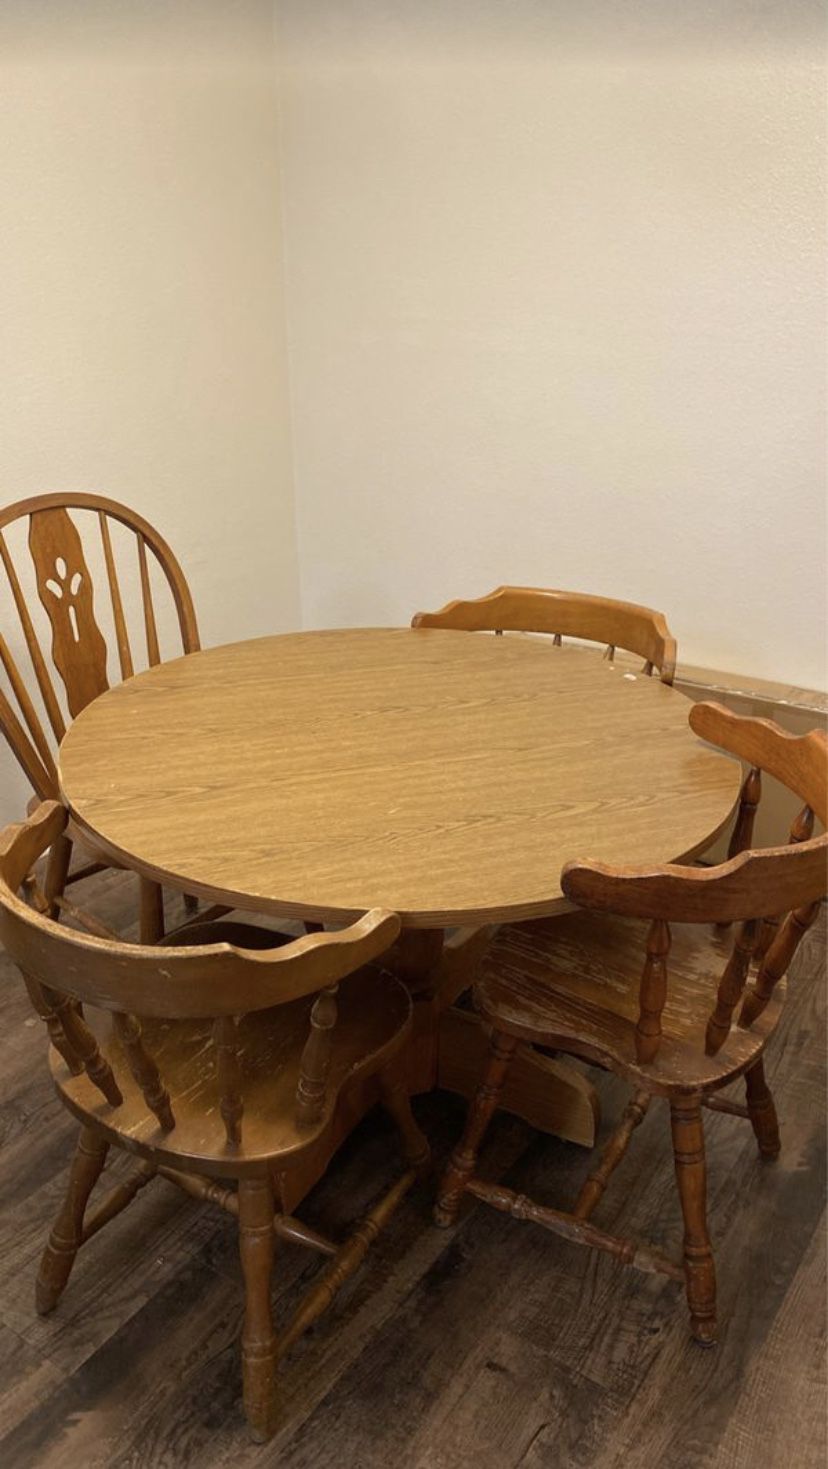 Table & 4 chairs NEED GONE TODAY